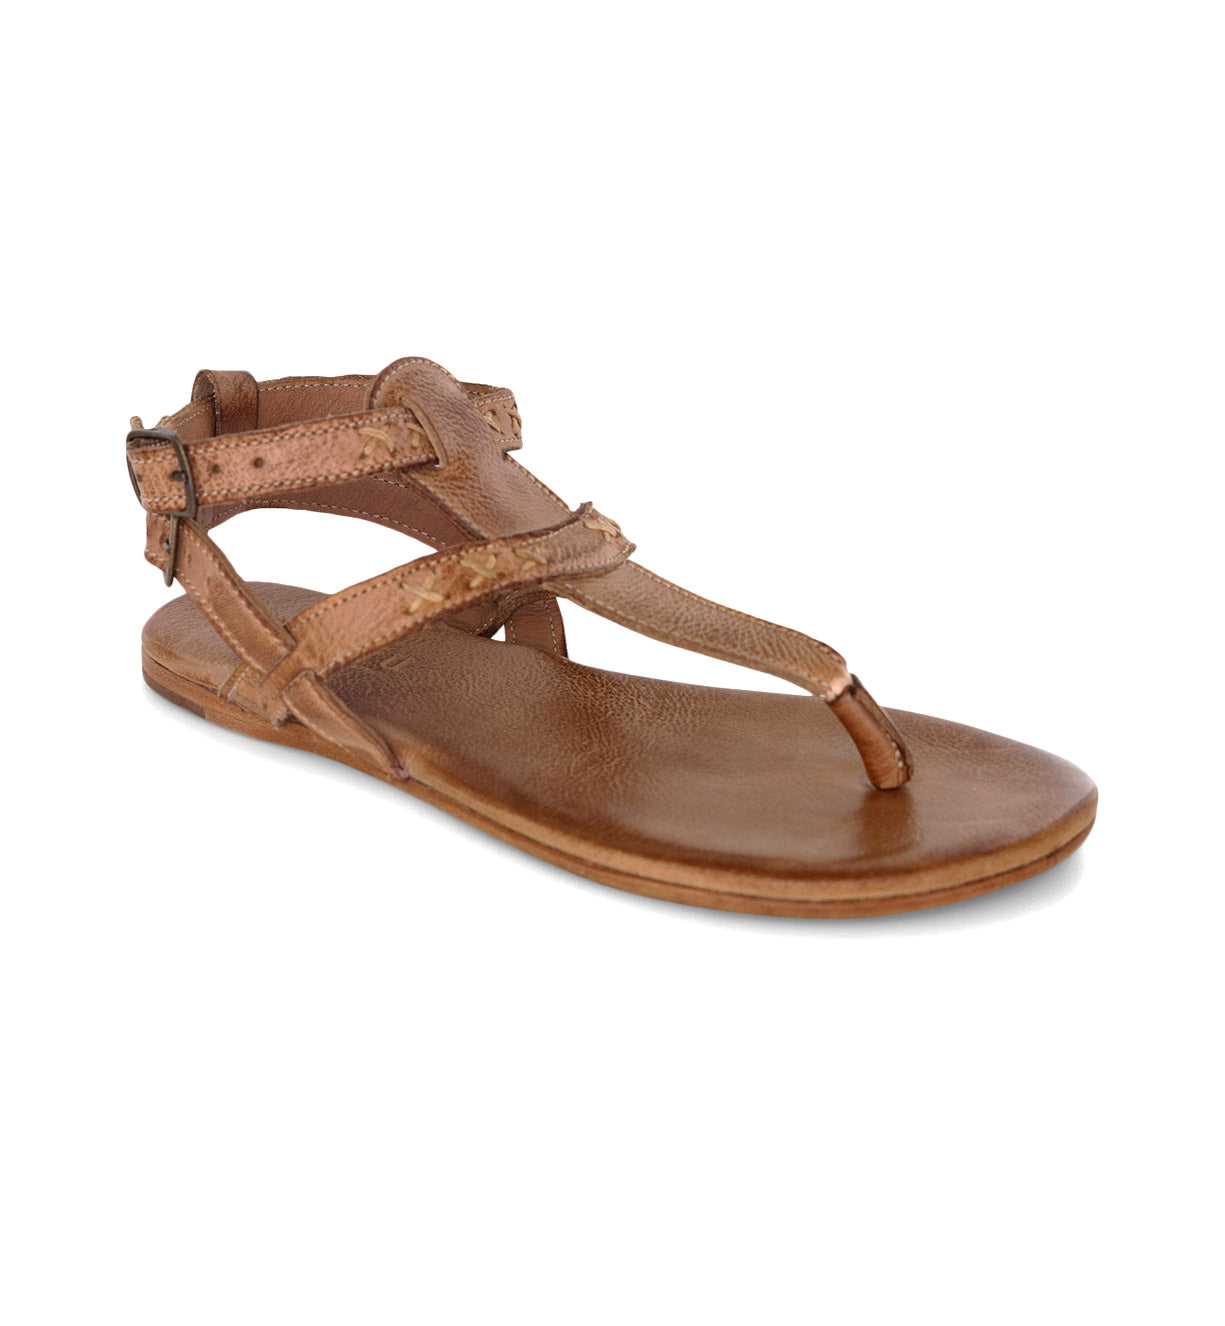 A women's Moon leather sandal with two straps by Bed Stu.